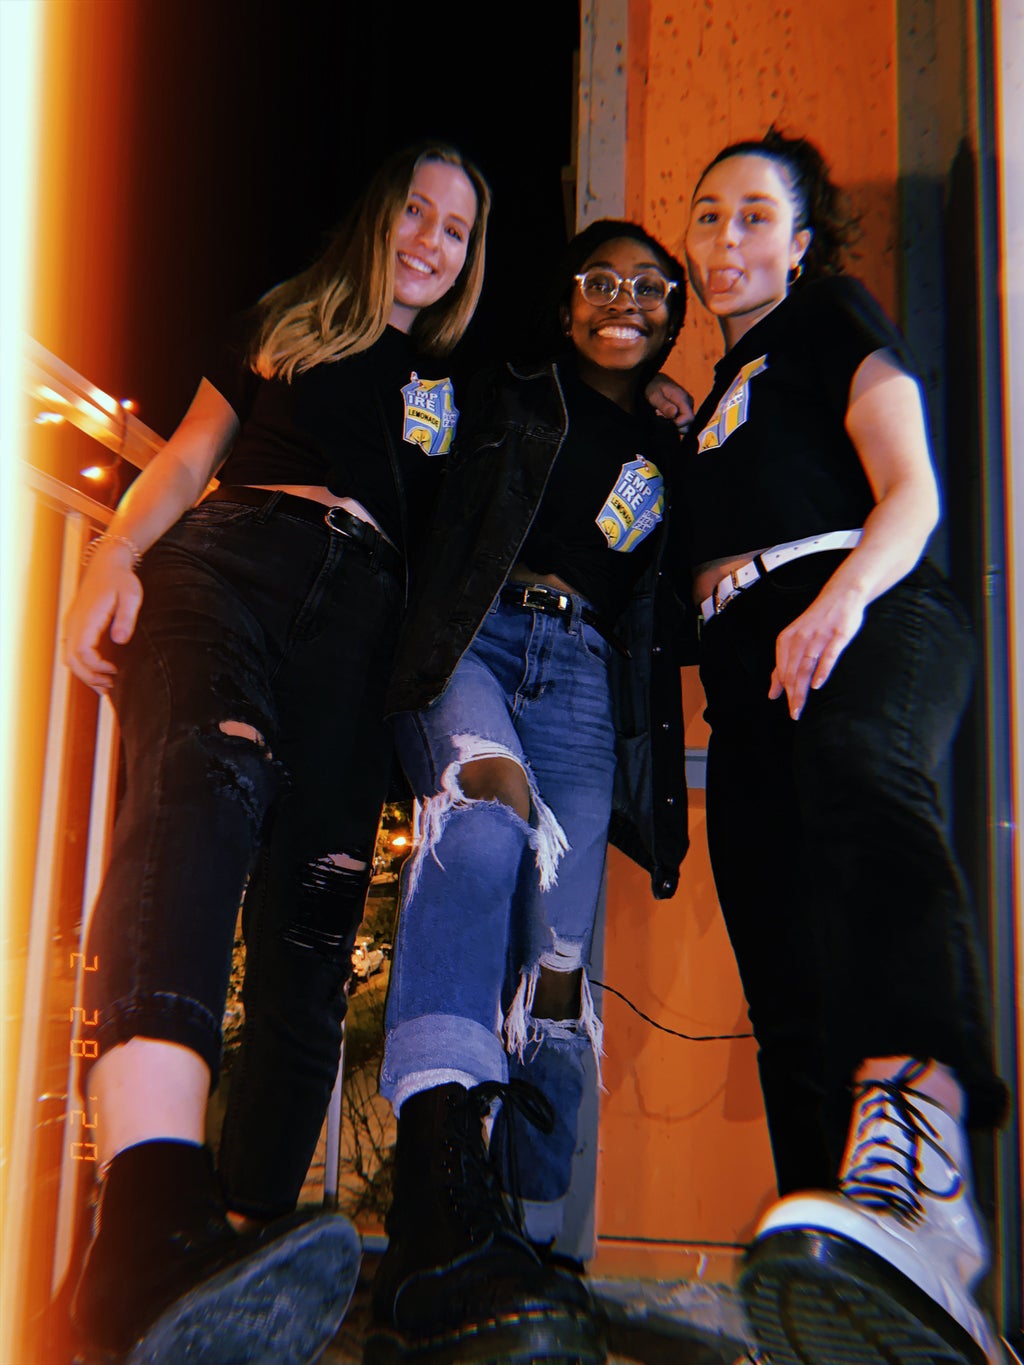 3 friends posing with boots